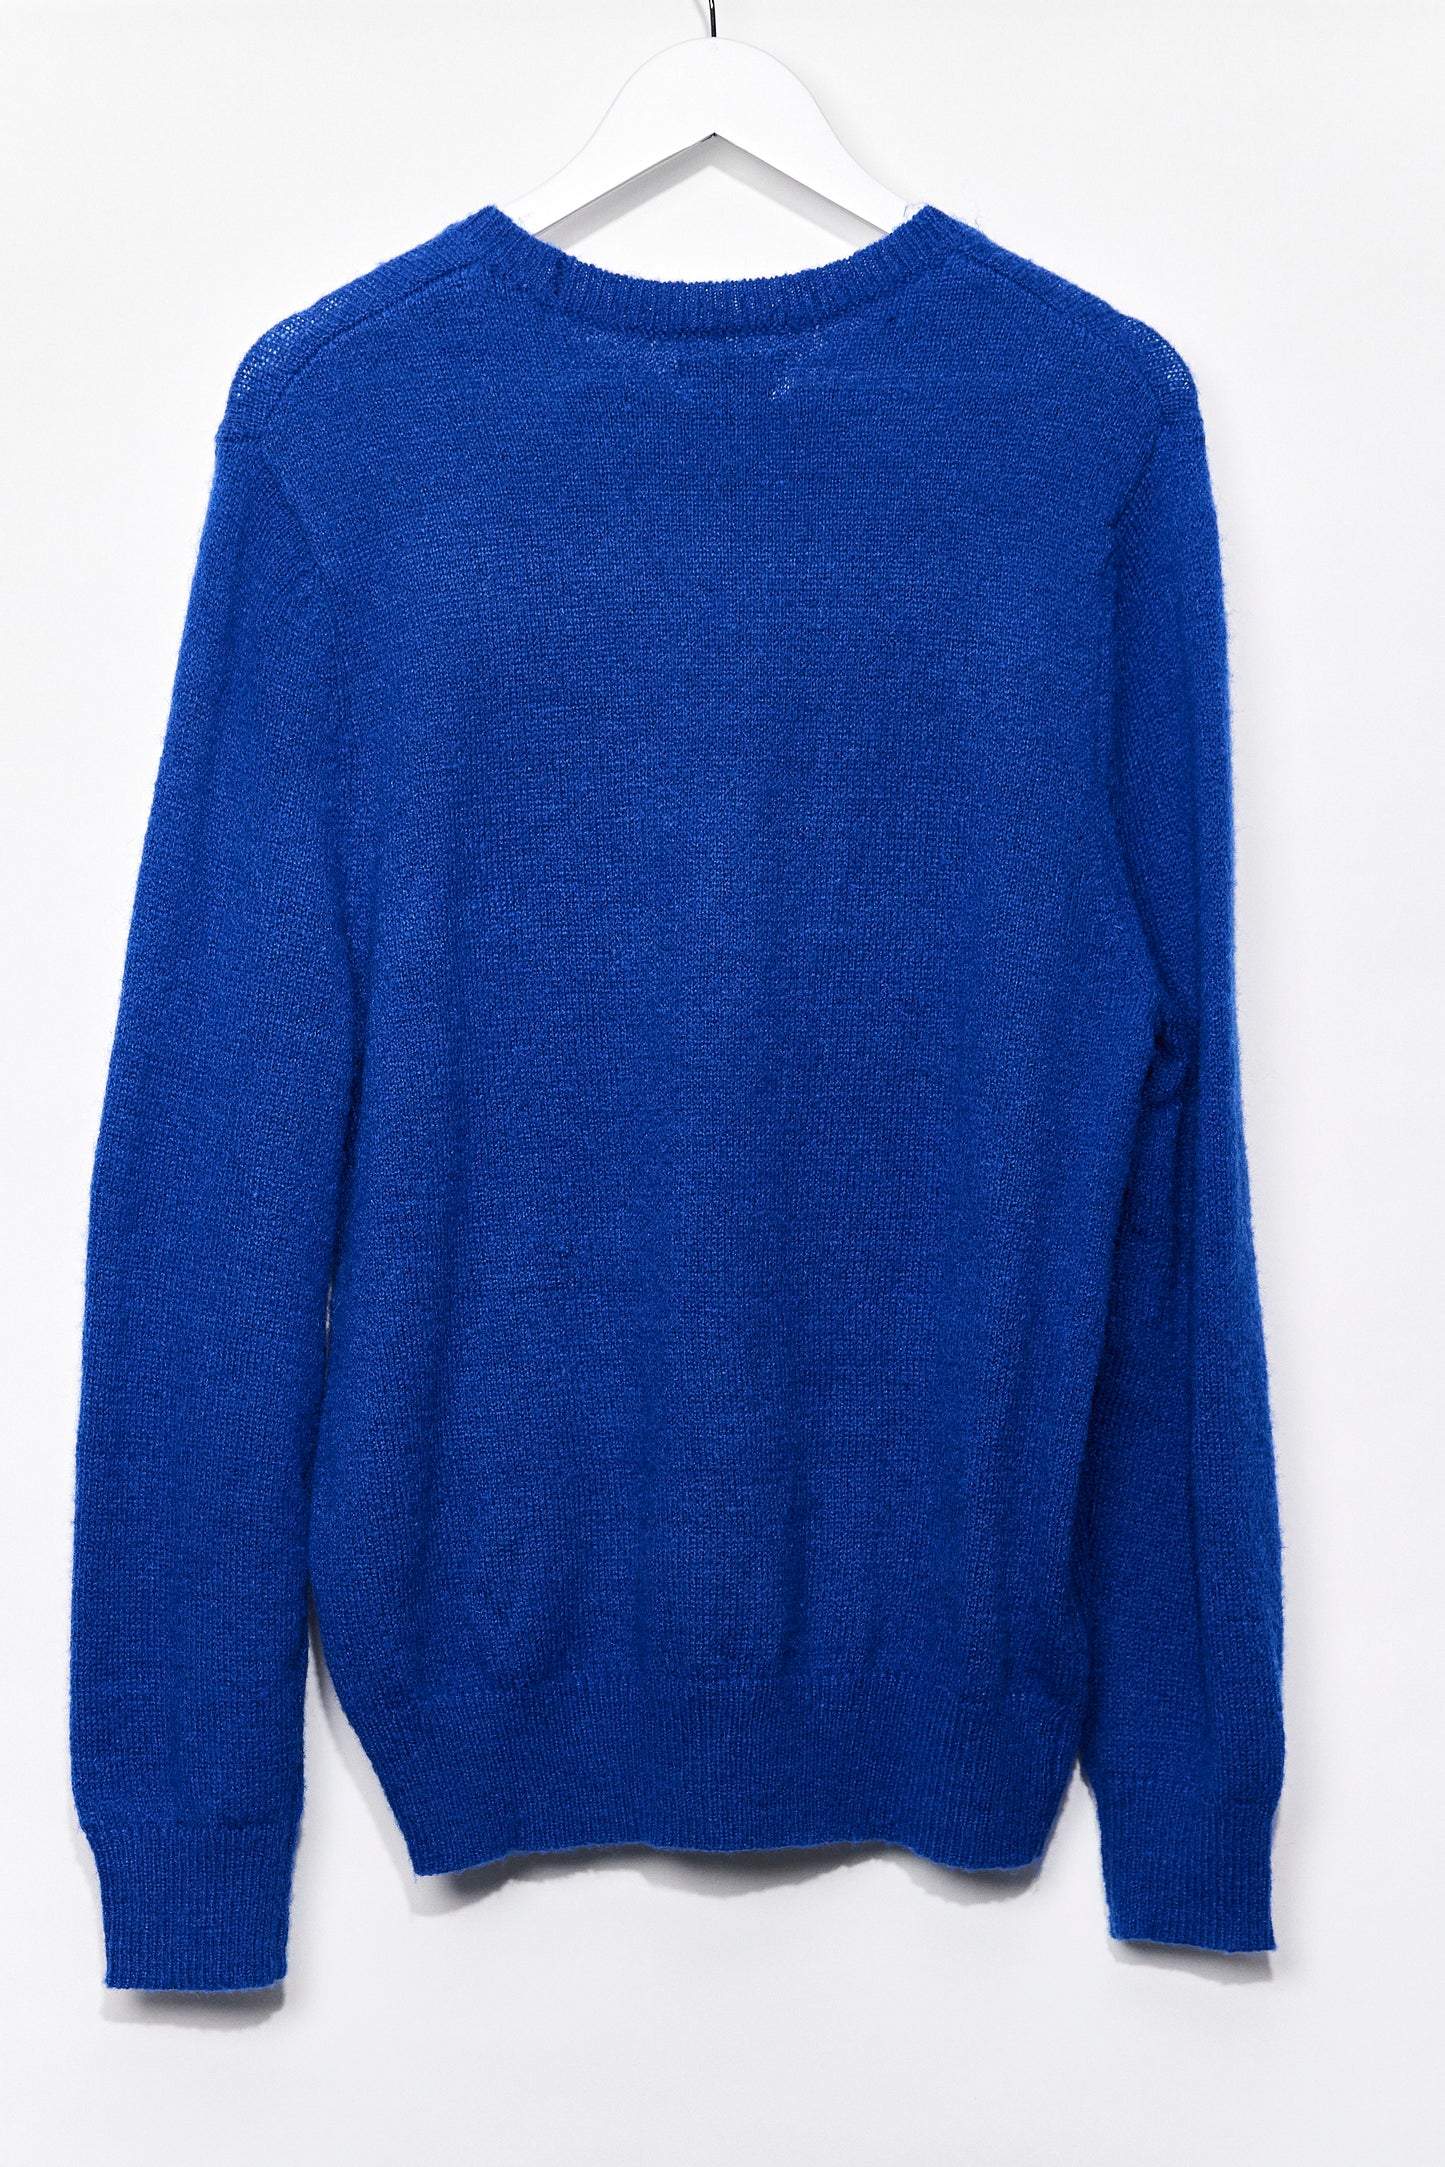 Mens Topman Blue Knitted Jumper size Large